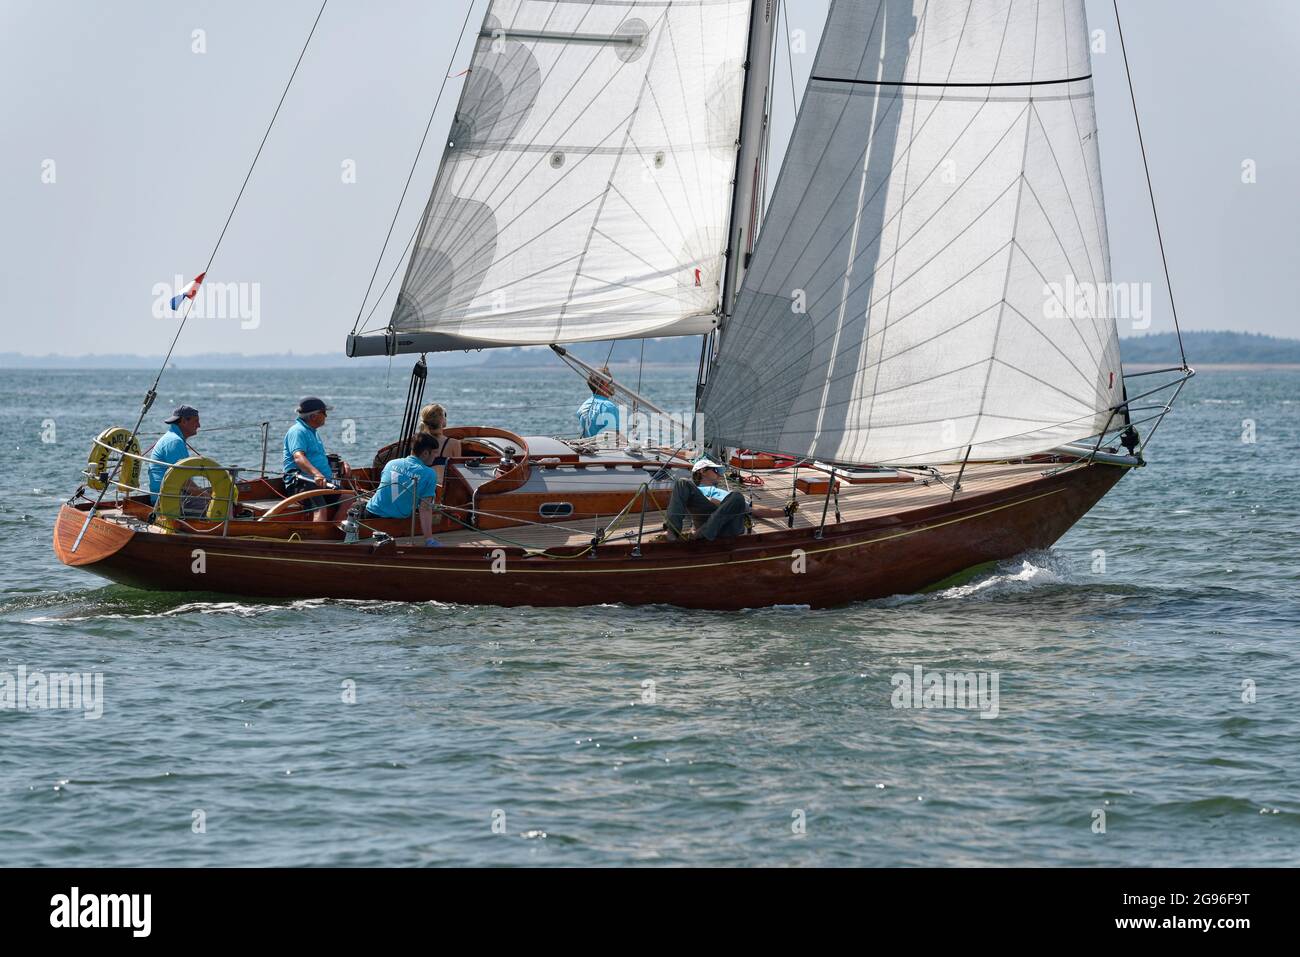 Sunmaid V a traditional wooden sailing yacht built in Cowes in 1967 enjoying racing in some light winds during the Cowes Classic Reggata Stock Photo